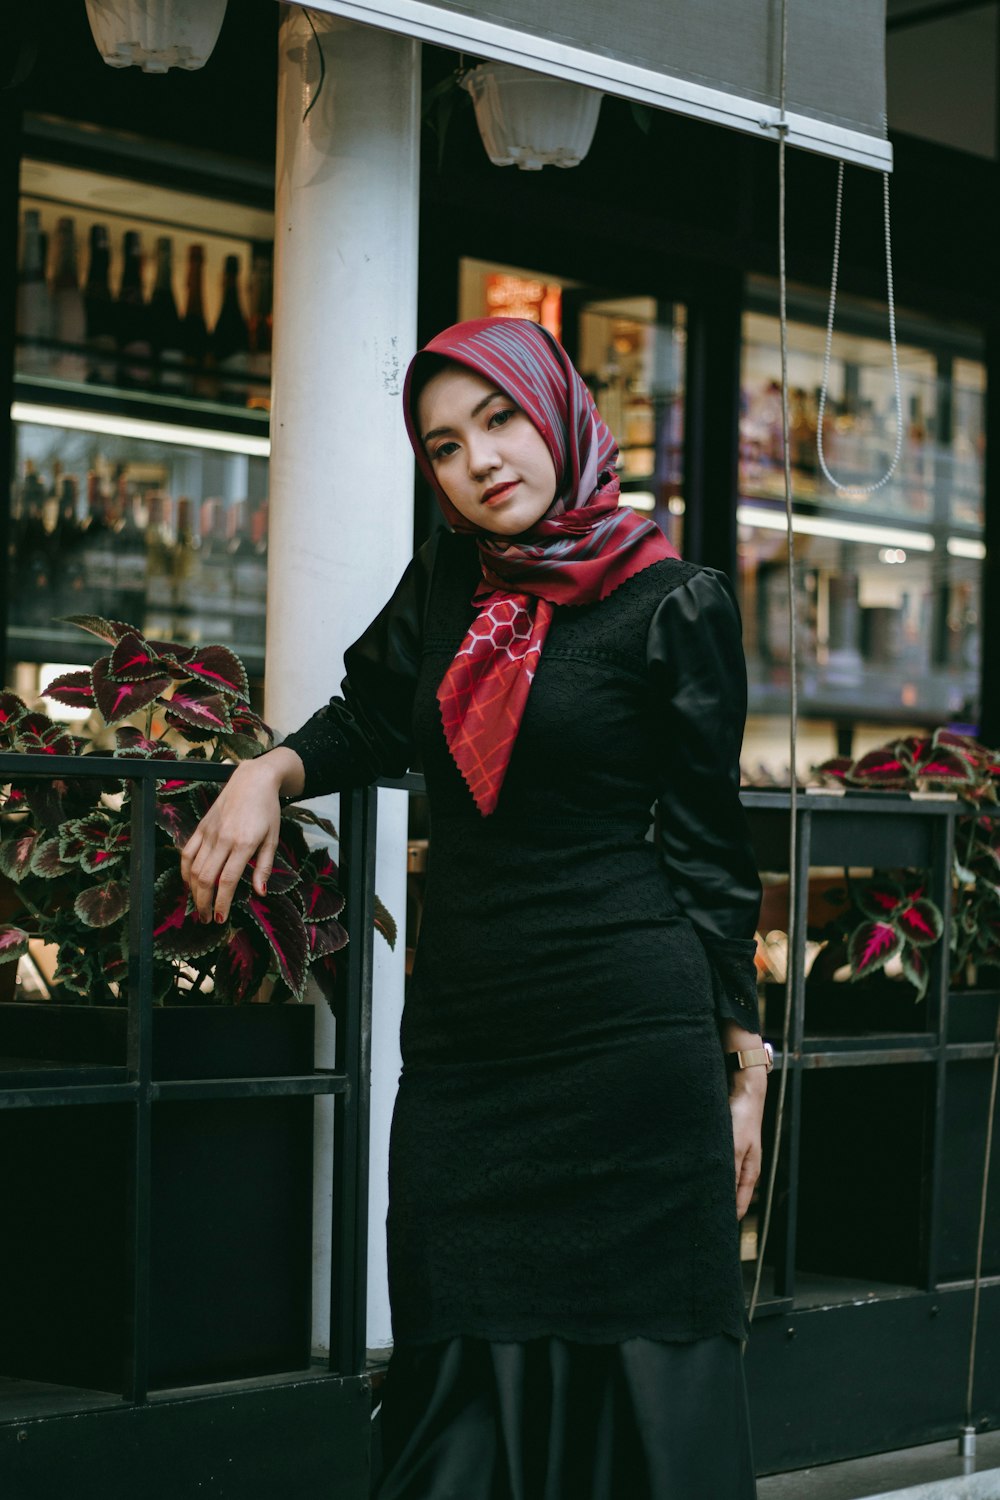 a woman wearing a hijab standing in front of a store